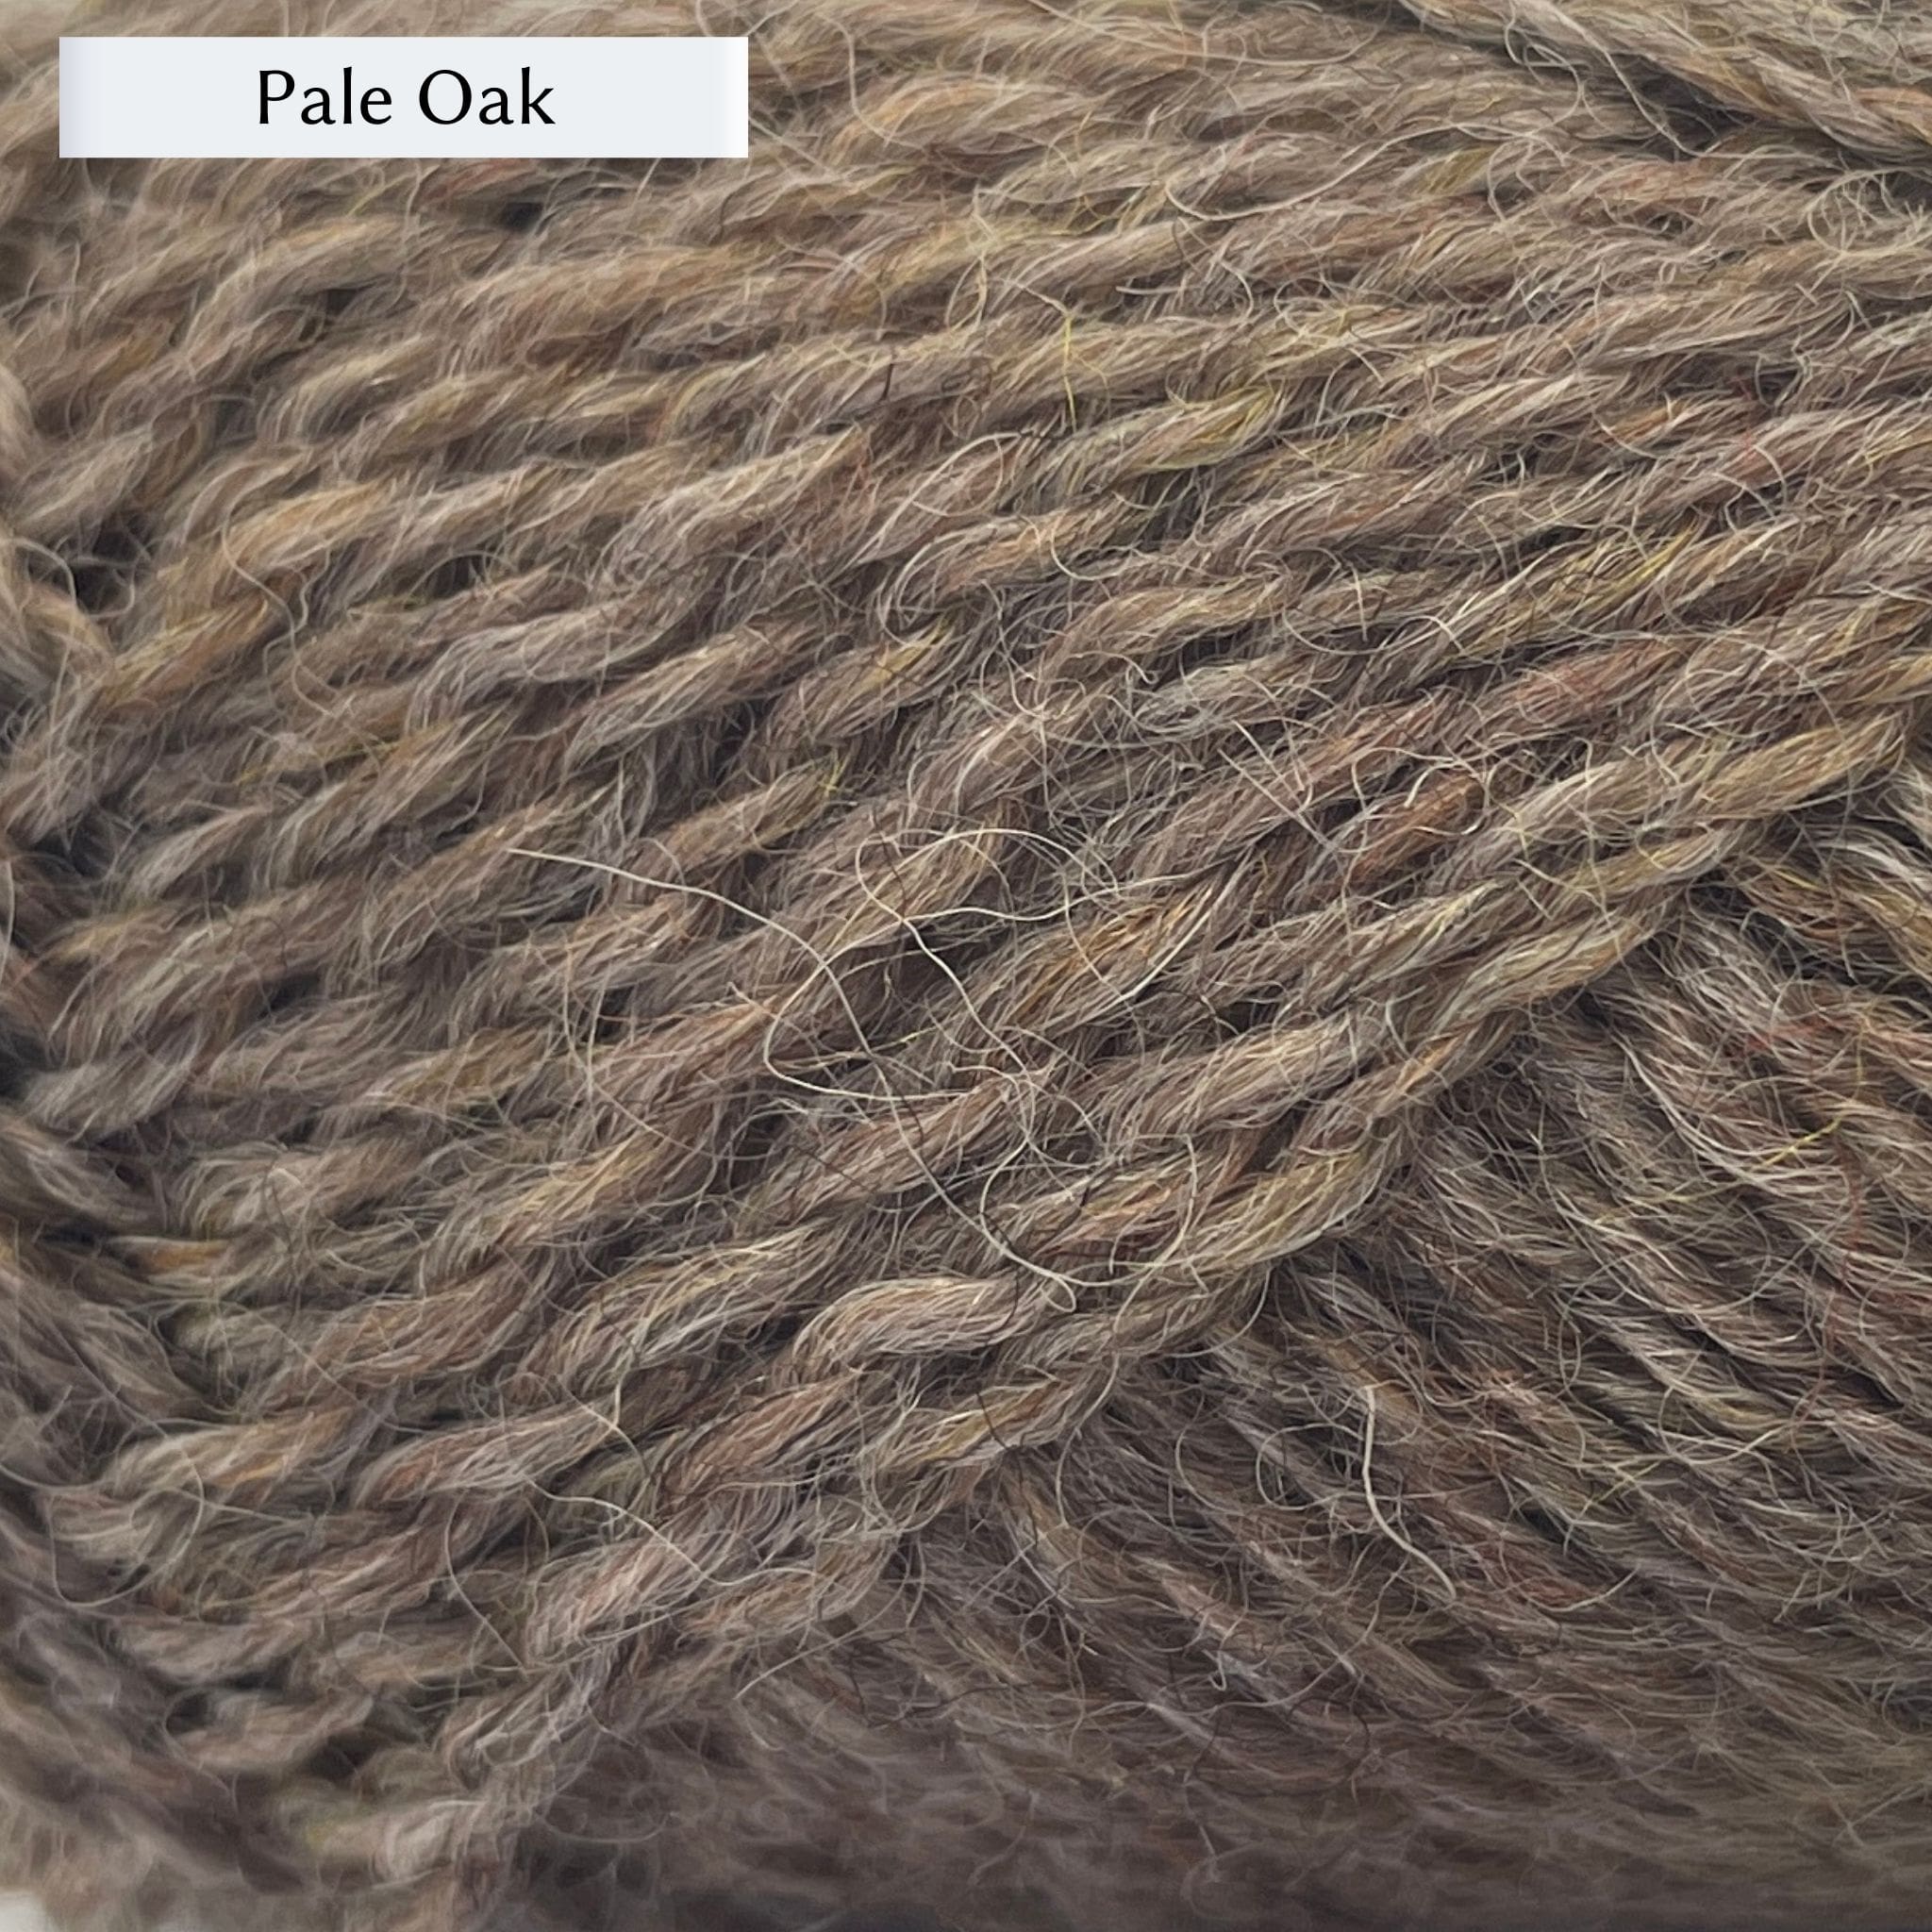 Marie Wallin's British Breeds yarn, a fingering weight, in color Pale Oak, a warm natural tan